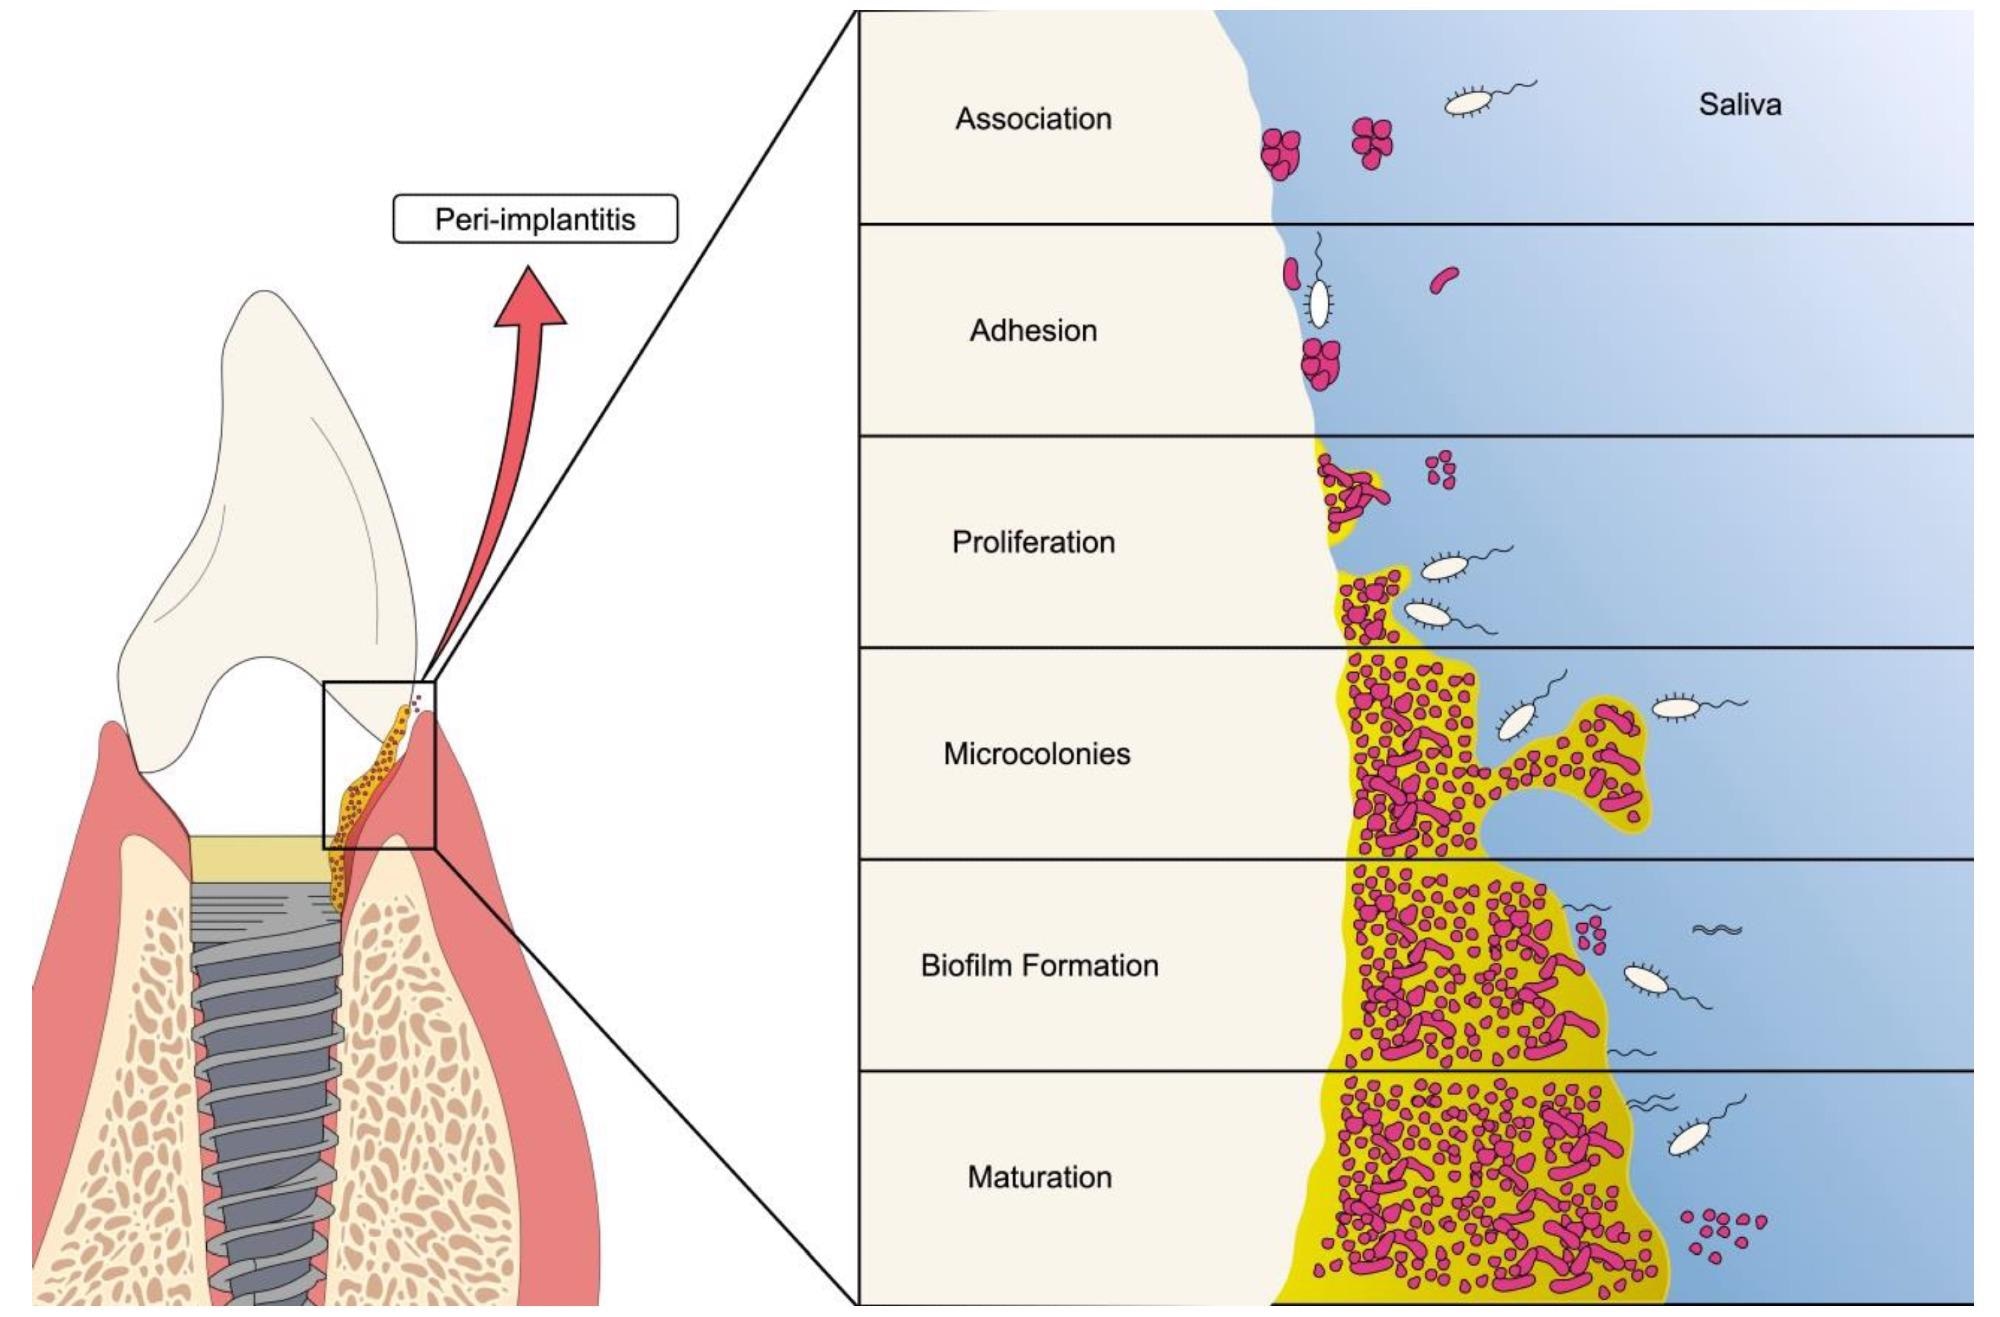 Schematic representation of oral biofilm formation on dental implants. The figure shows the different stages of bacterial biofilm formation ranging from adhesion to the establishment of the mature colony.